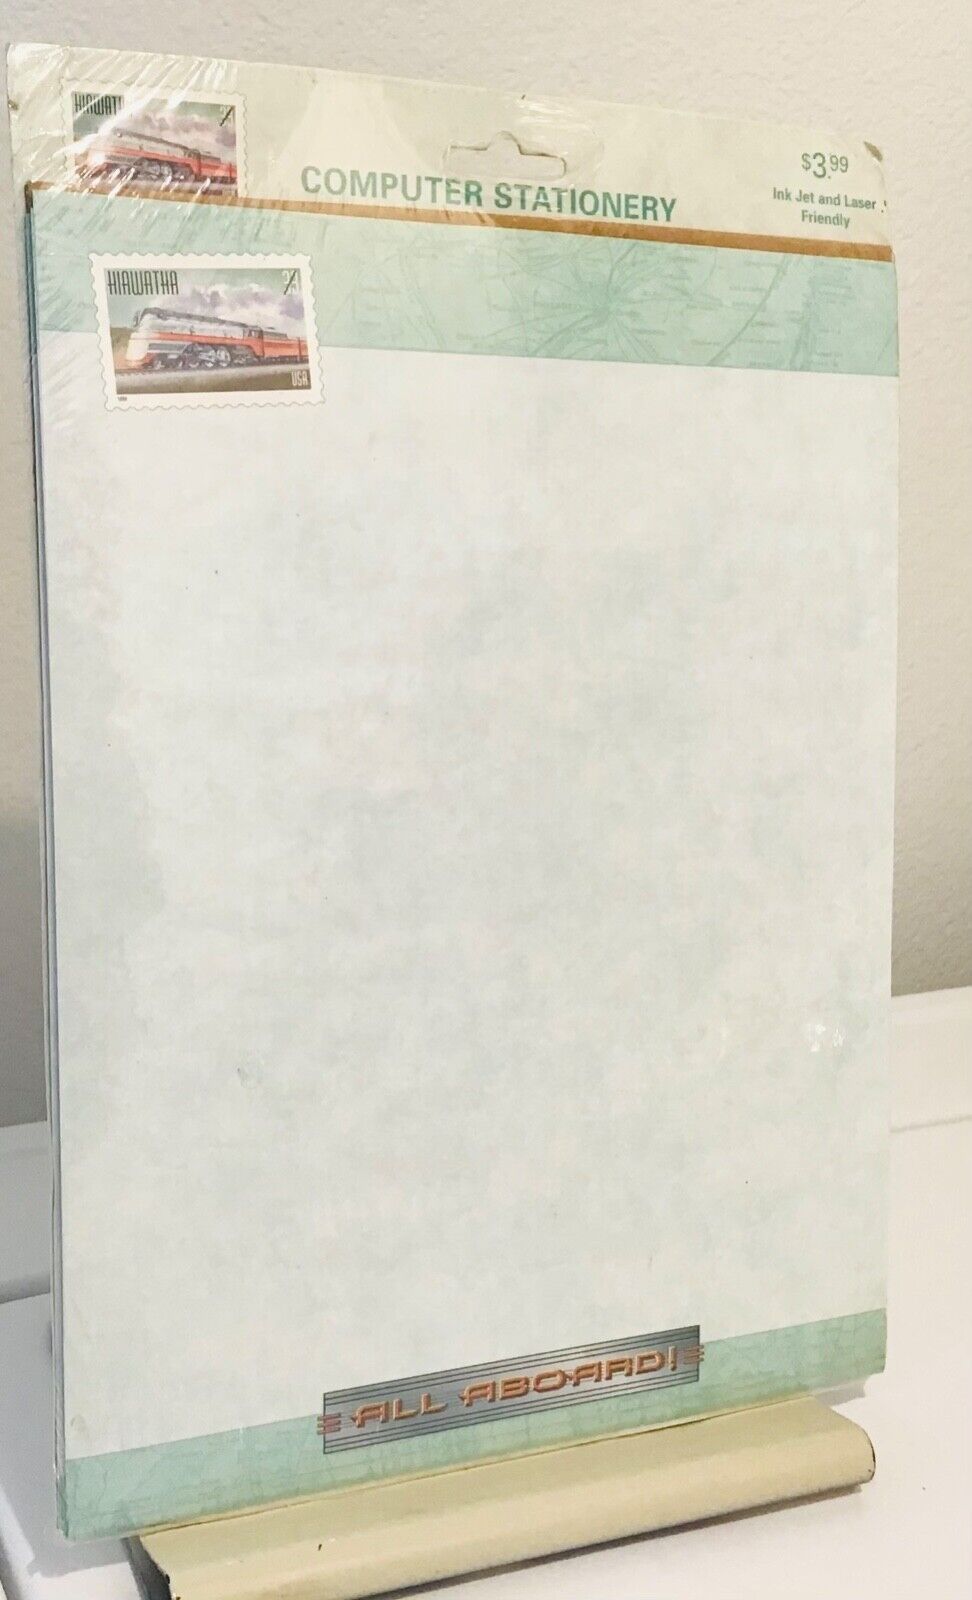 USPS 1999 All Aboard Hiawatha Locomotive 20 stationery sheets 33 cent stamp pic.